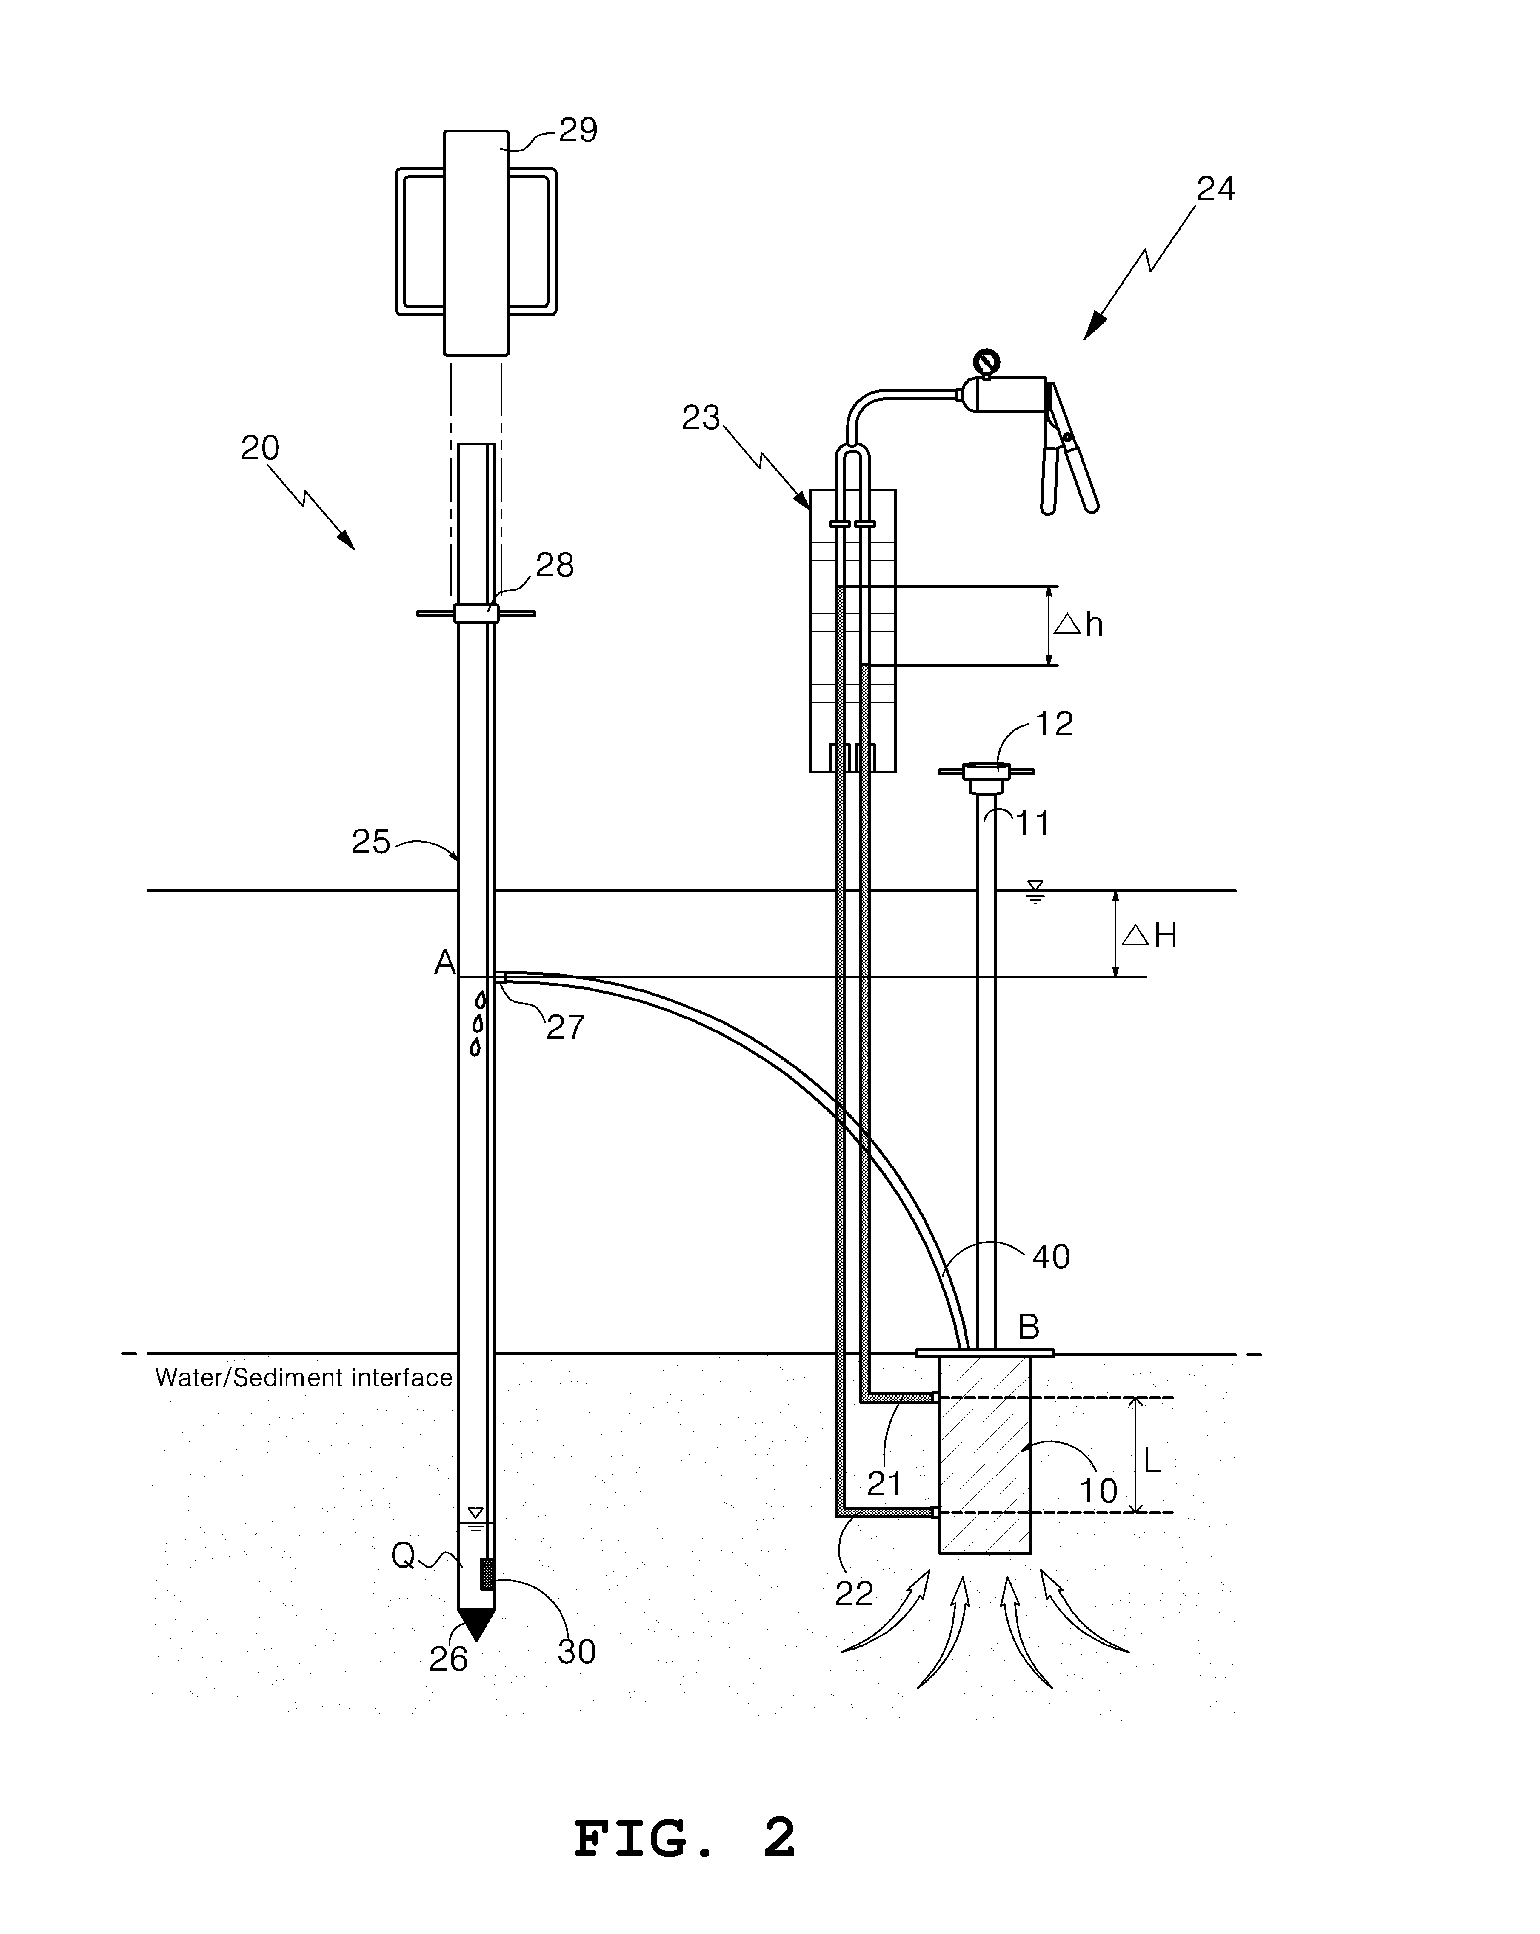 Measurement device for water exchanges across water/sediment interface